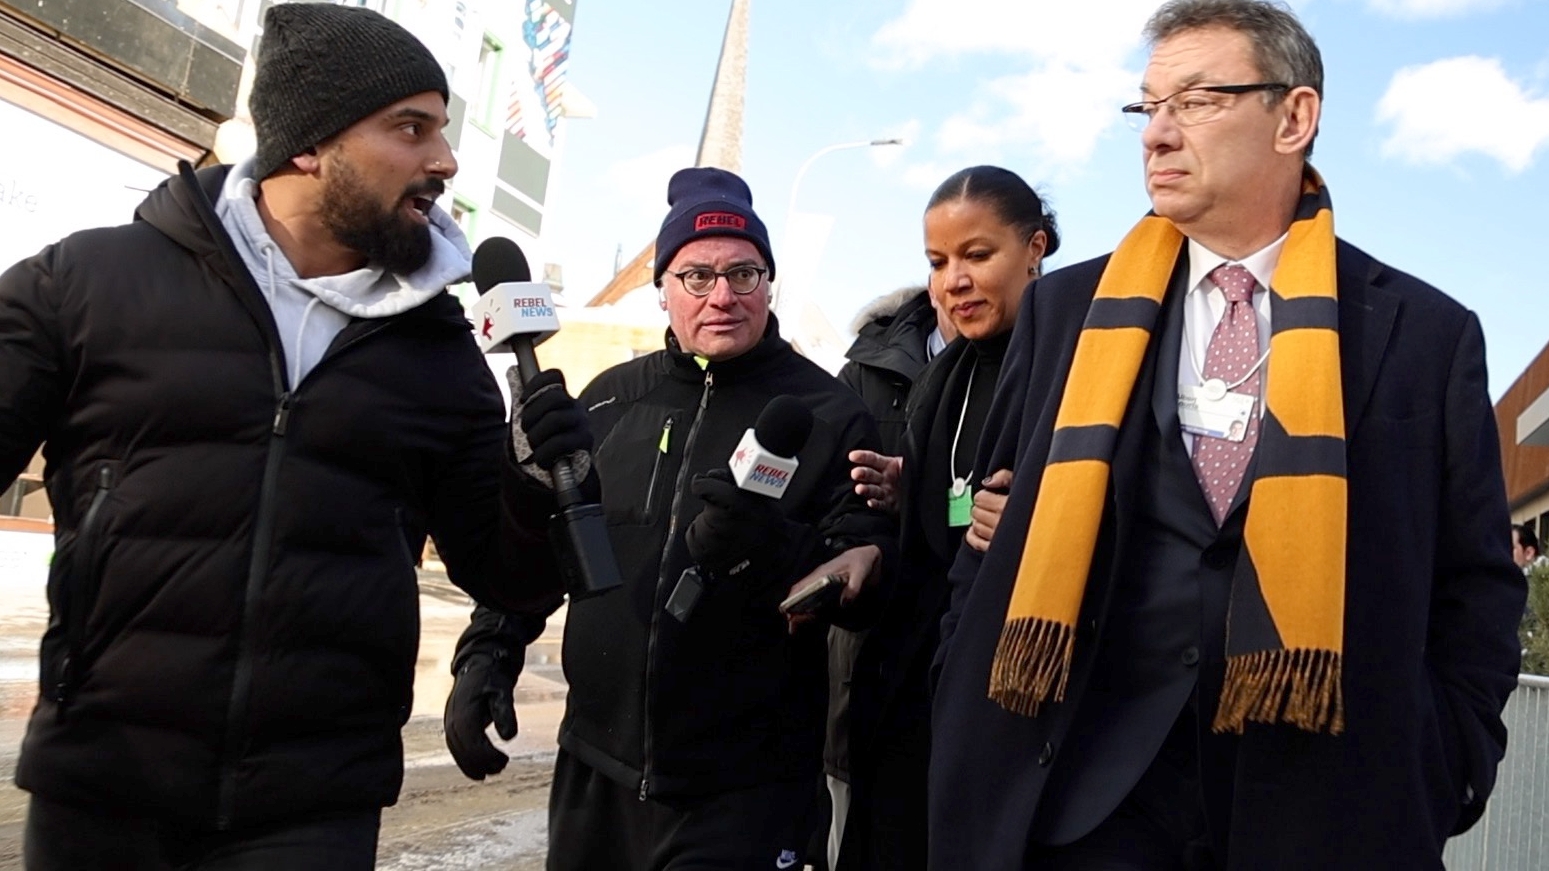 Avi Yemini - 🚨WE CAUGHT HIM! Watch what happened when @ezralevant and I spotted Albert Bourla, the CEO of Pfizer, on the street in Davos today.  We finally asked him all the questions ...